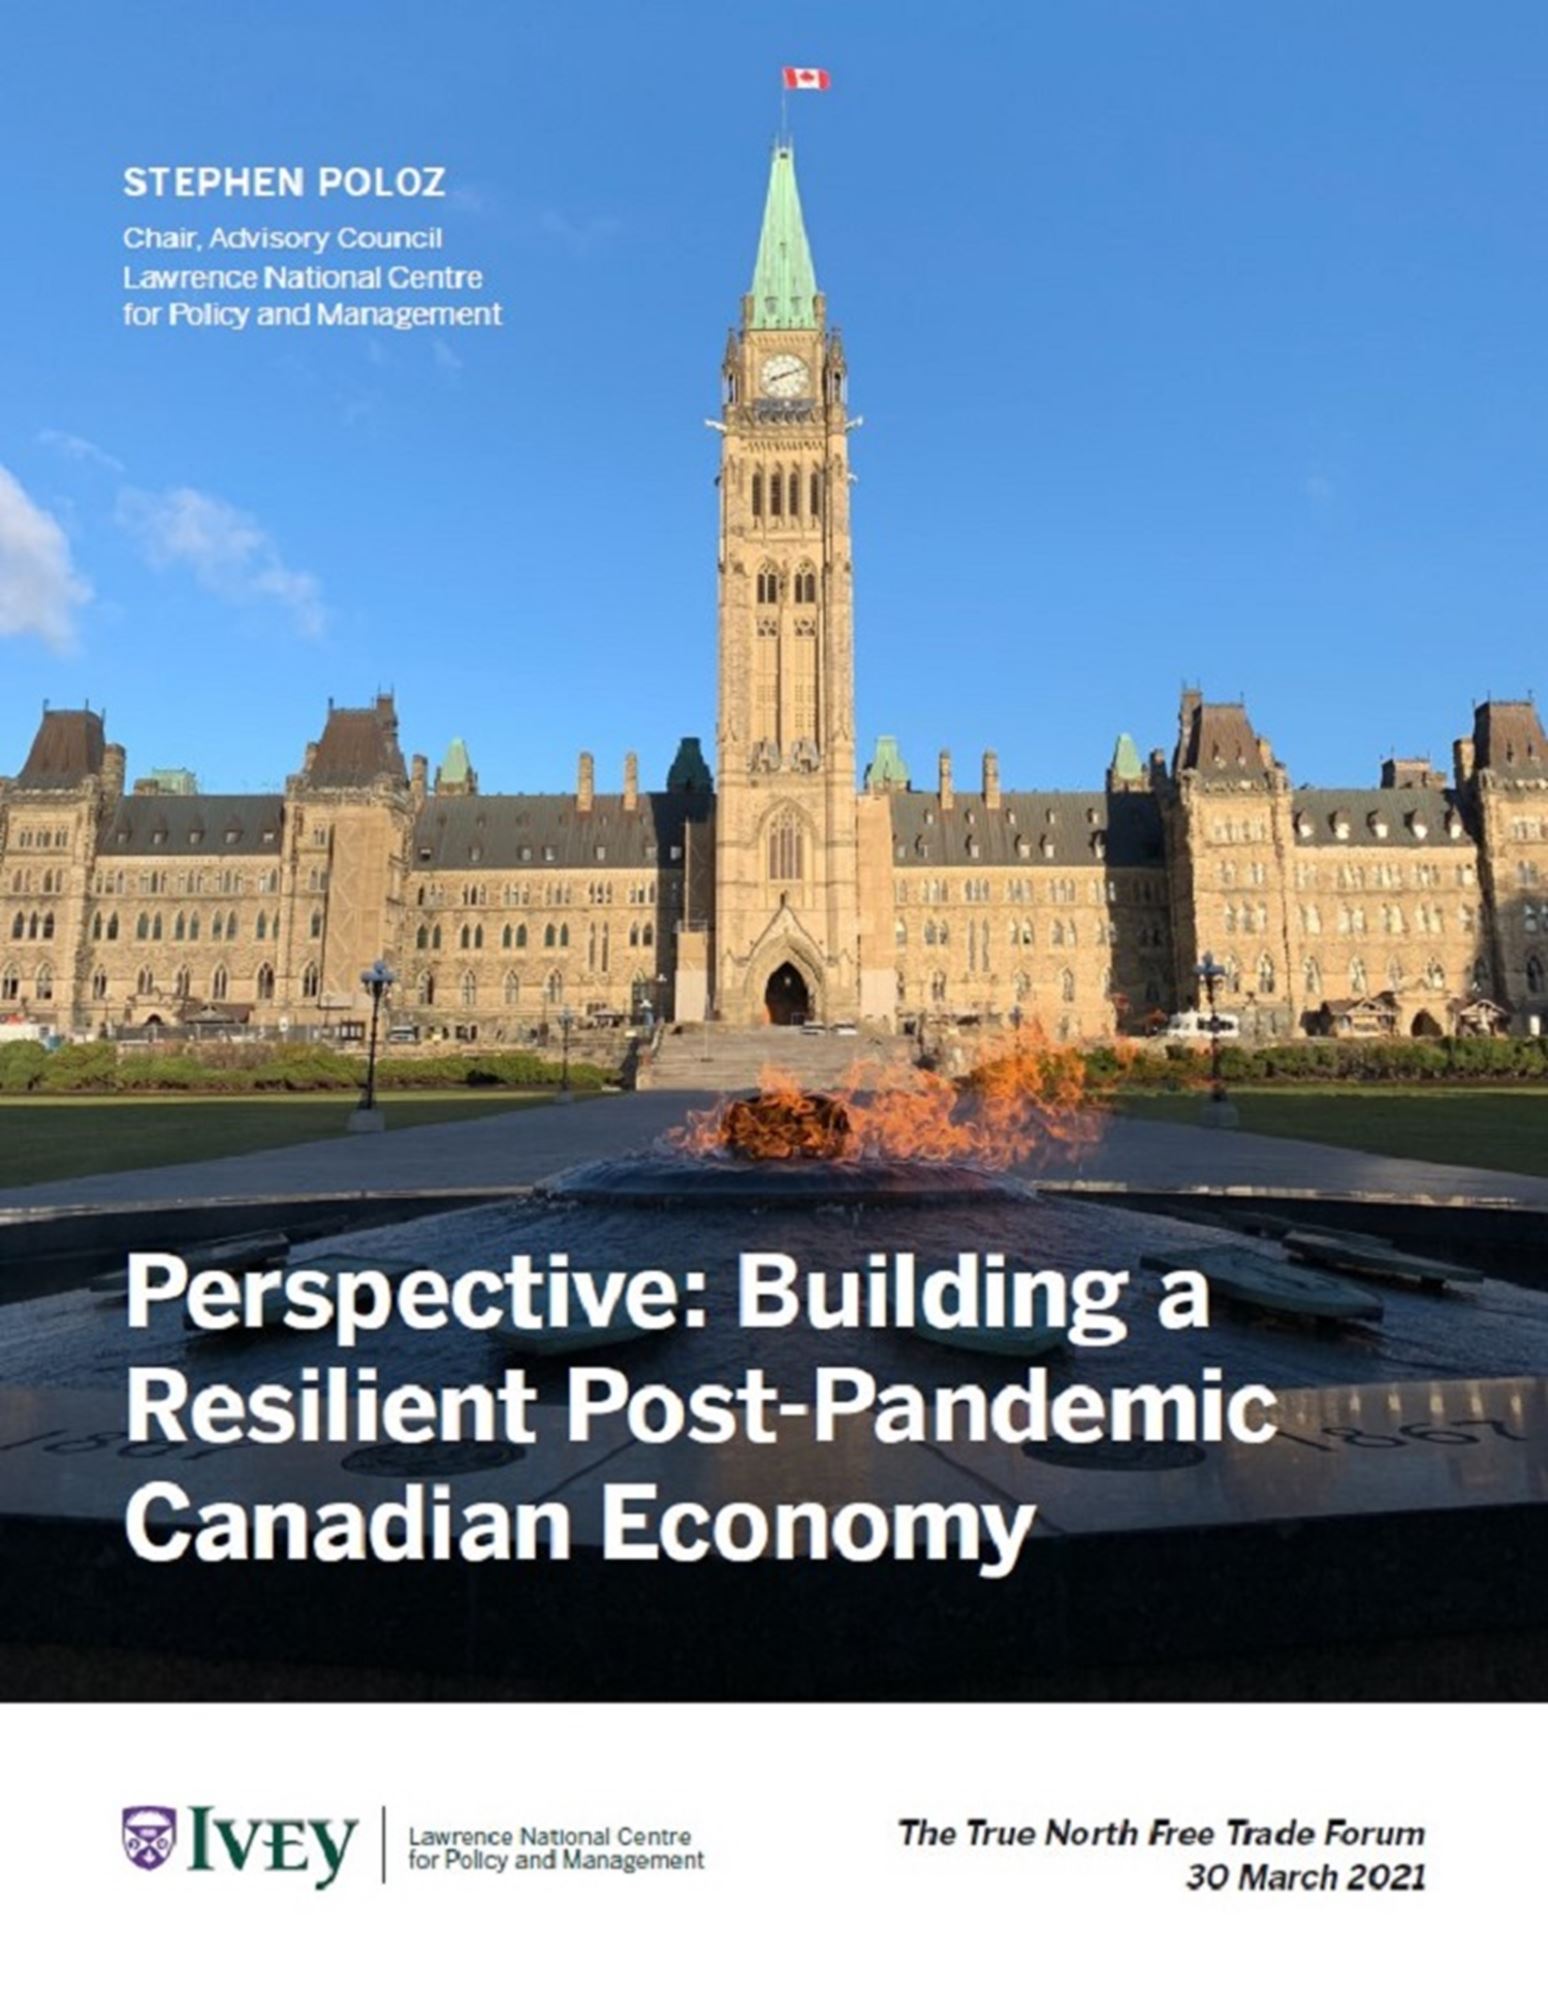 Perspective: Steve Poloz on Building a Post-Pandemic Canadian Economy